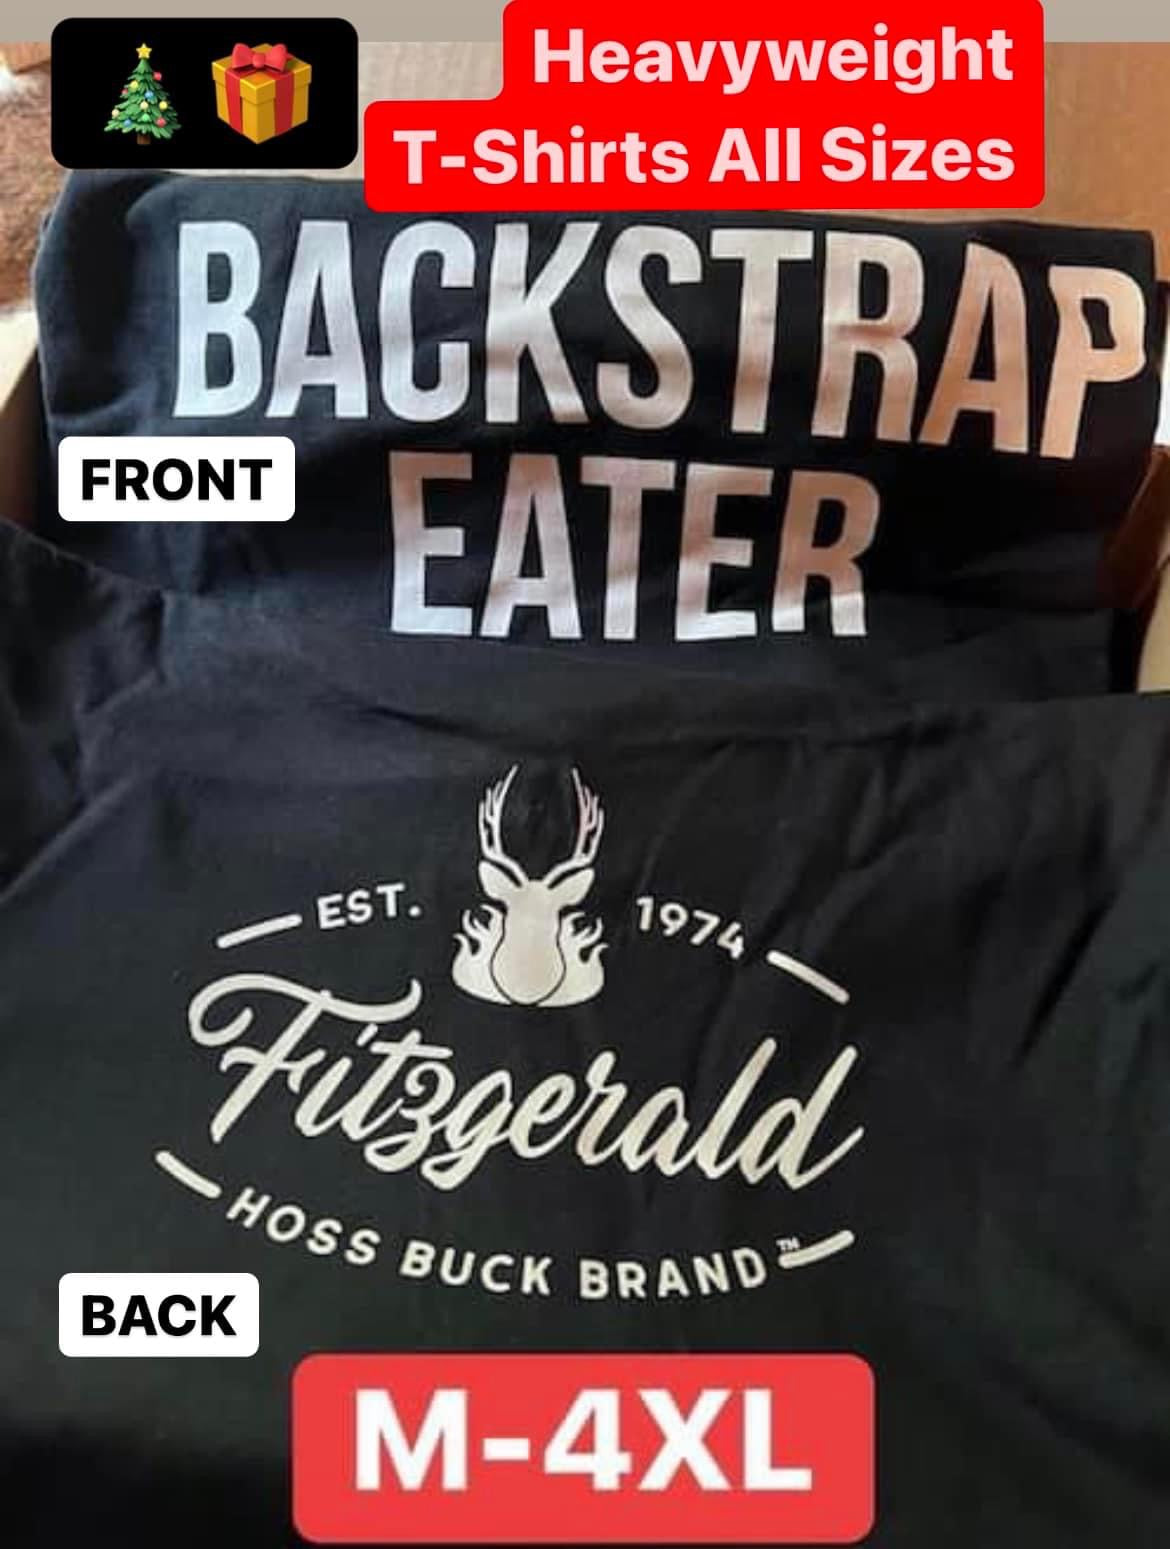 OFFICIAL BACKSTRAP EATER CLASSIC FIT T-SHIRT